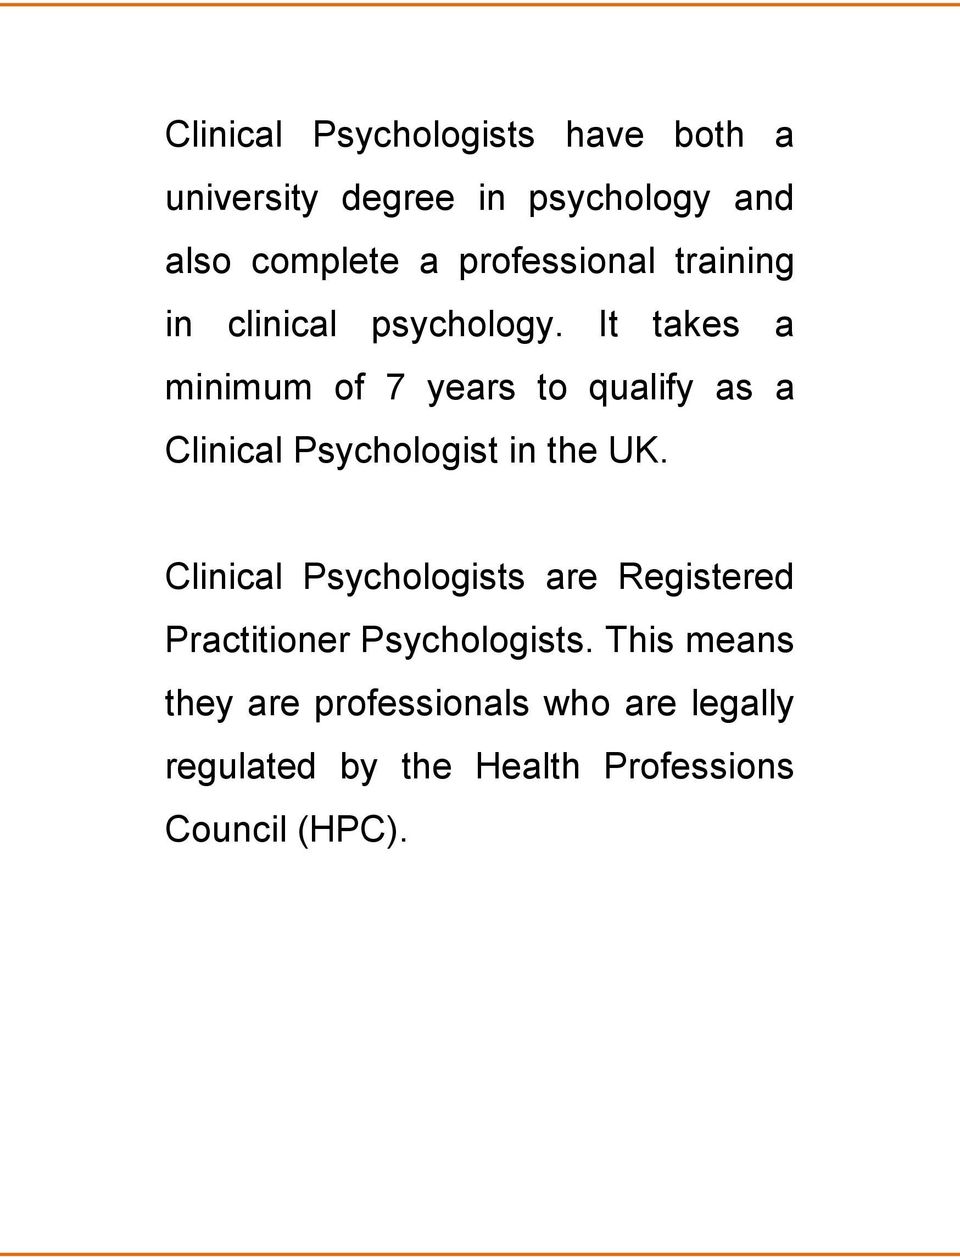 It takes a minimum of 7 years to qualify as a Clinical Psychologist in the UK.